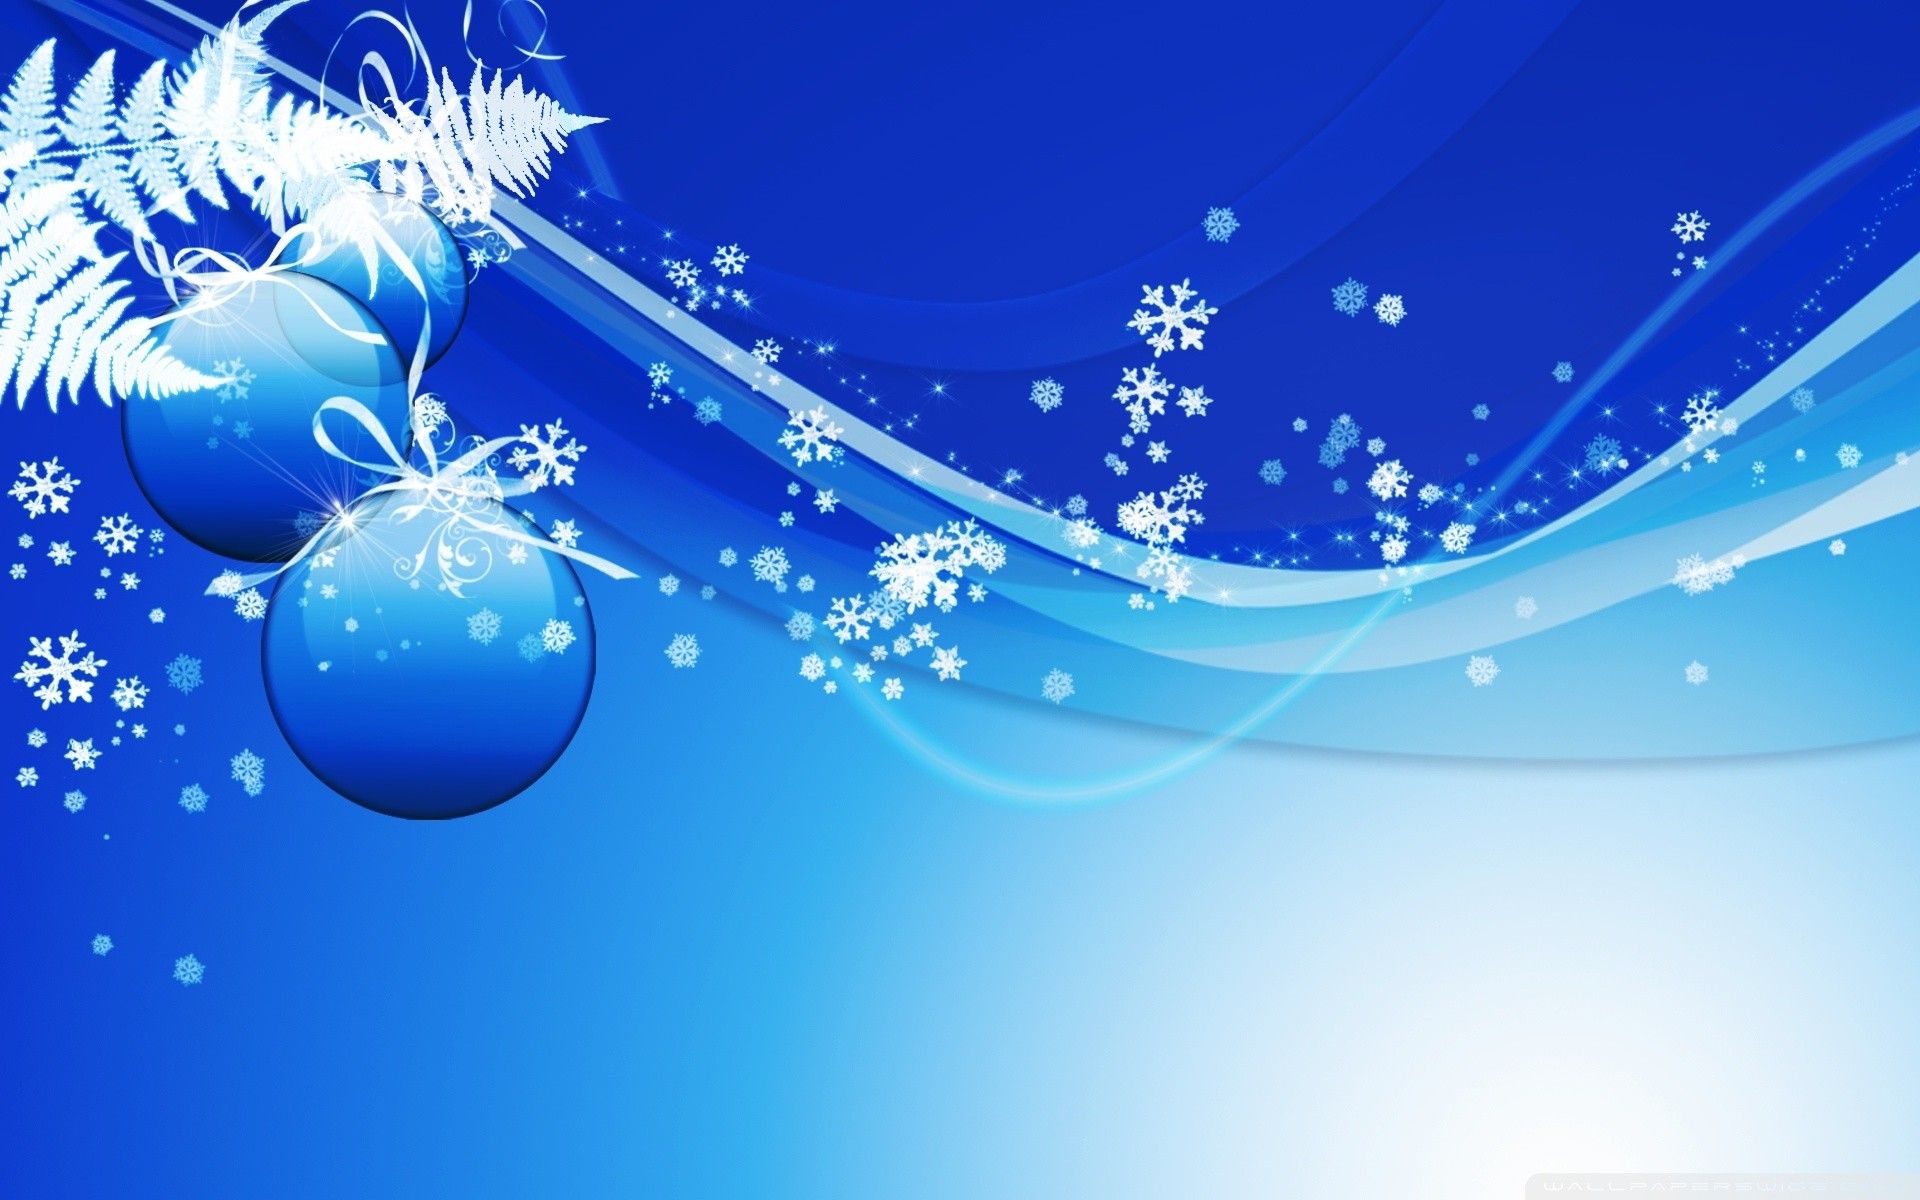 Blue Christmas Wallpaper background picture